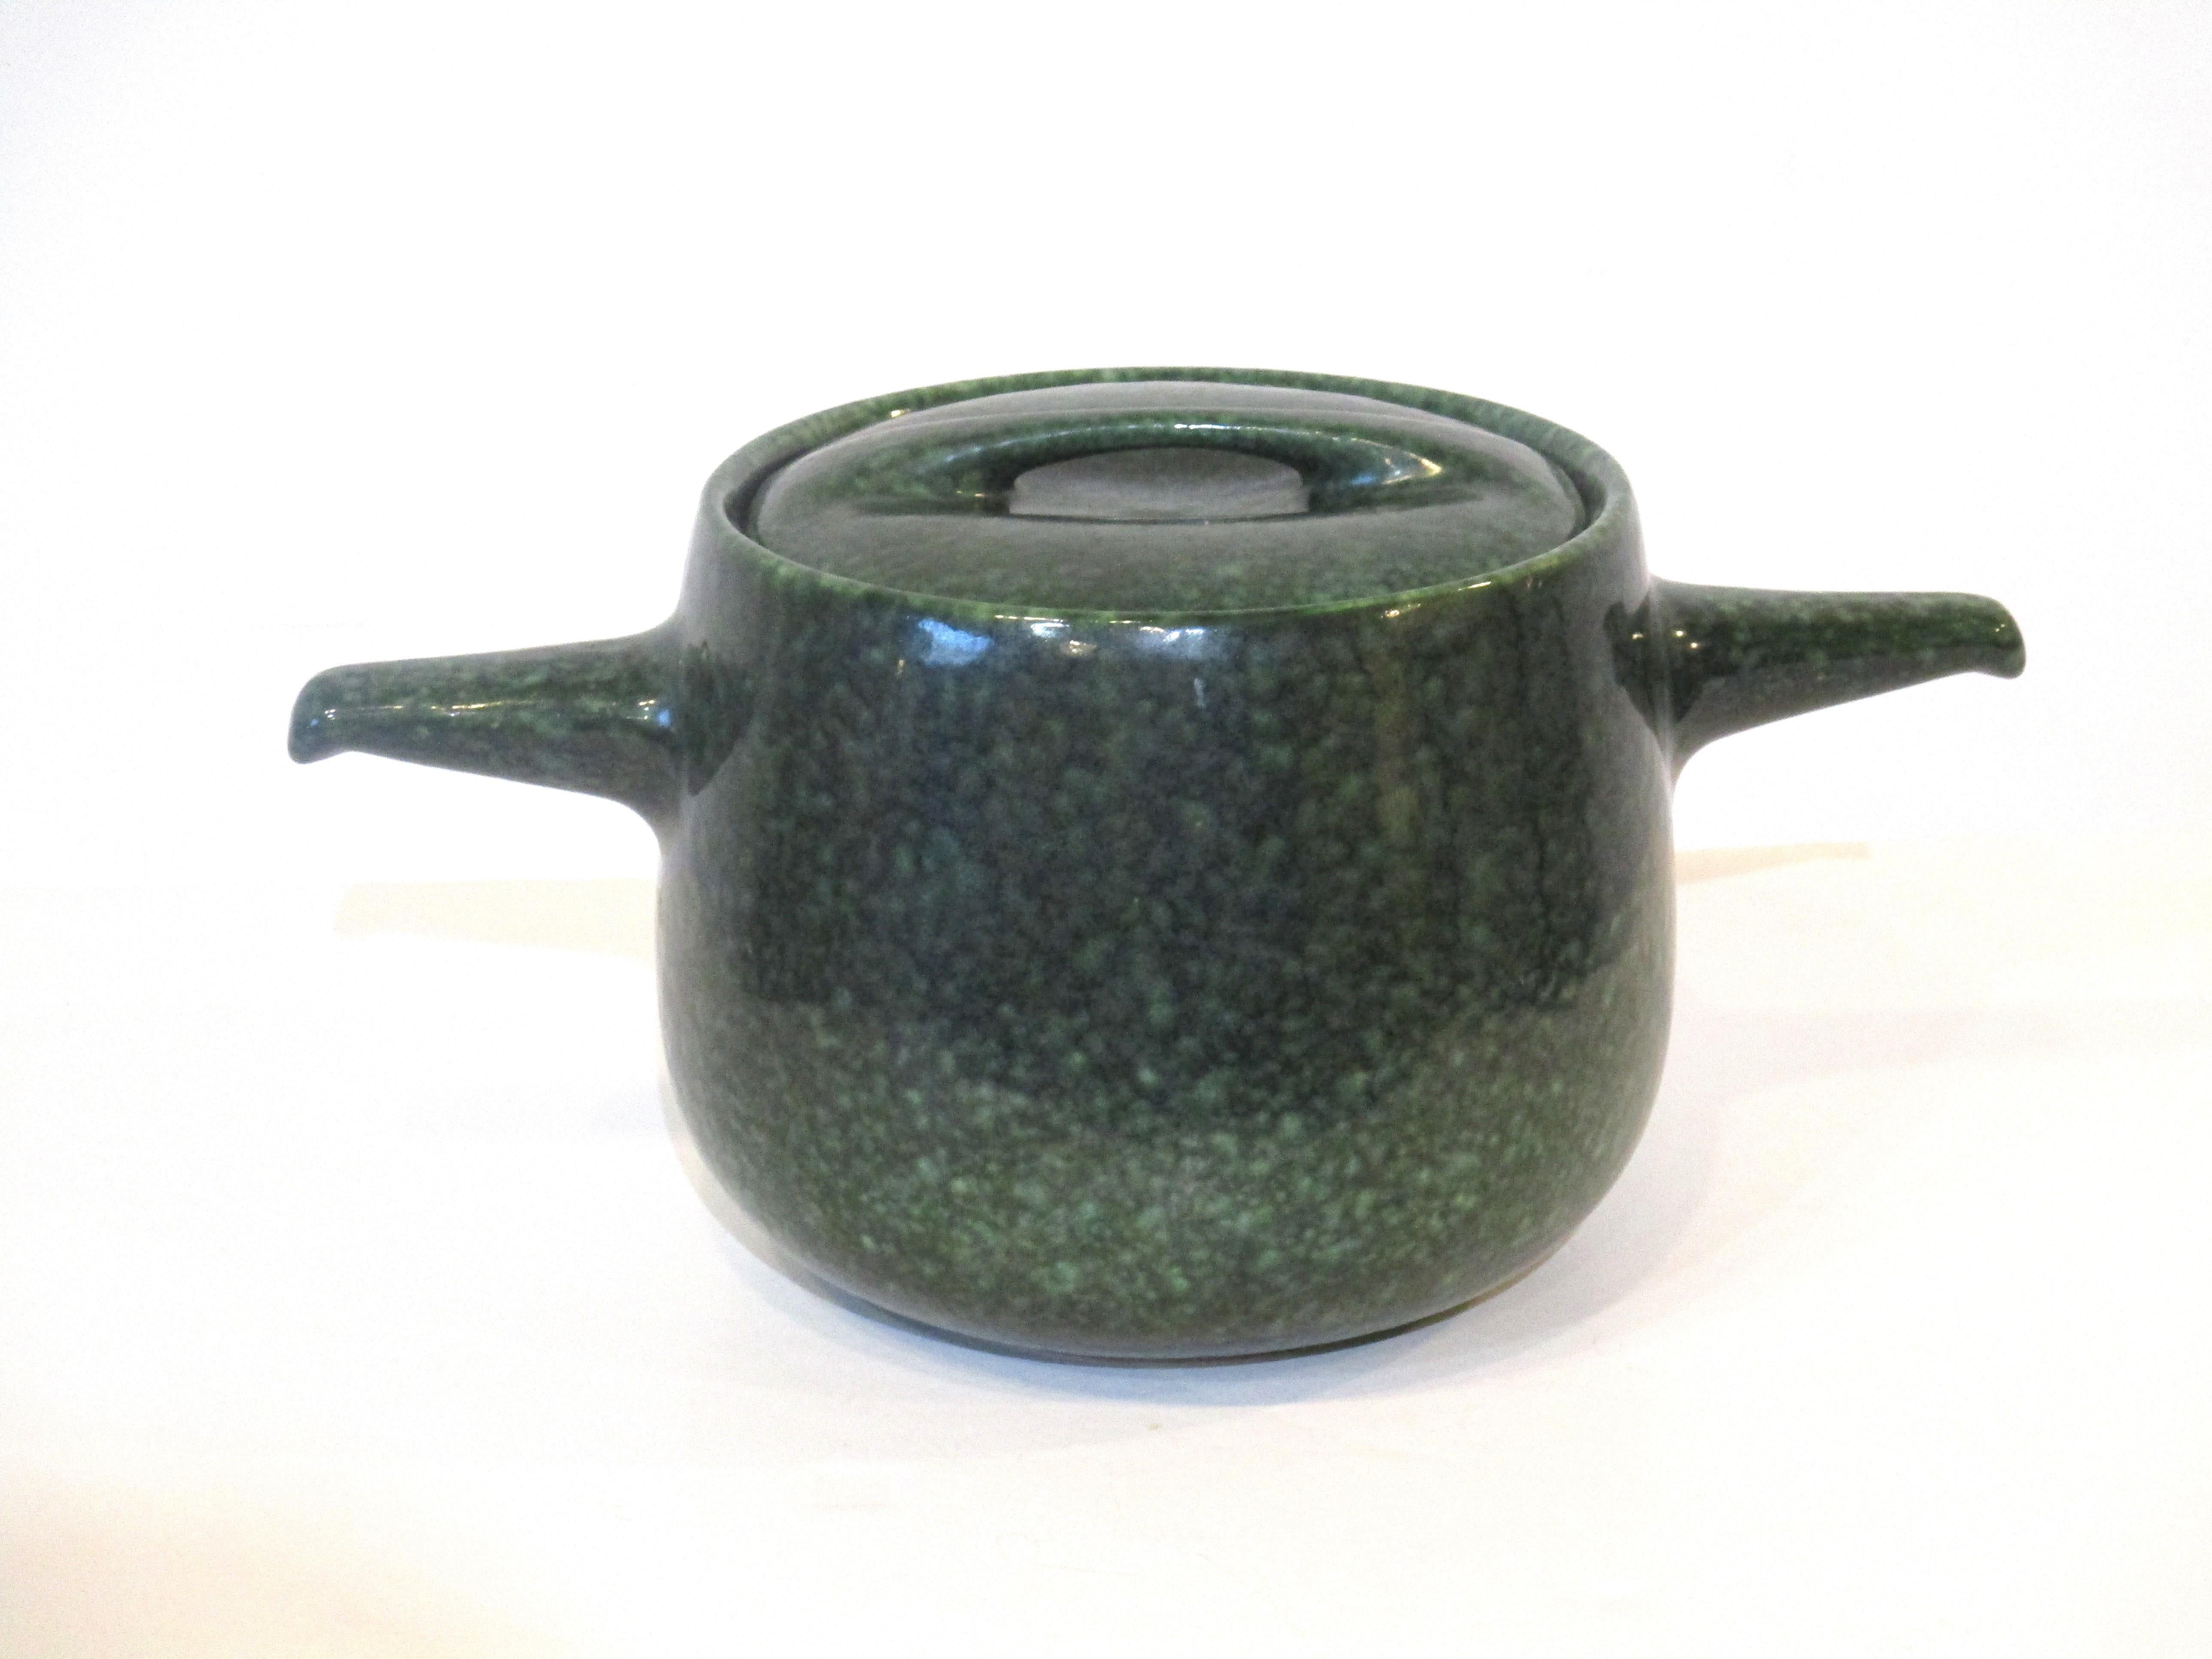 A very stylish pottery soup or serving tureen in a spotted green glaze called frog skin manufactured by the Roseville Pottery company designed by Raymor . A hard to find piece retaining the original sculptural lid .   